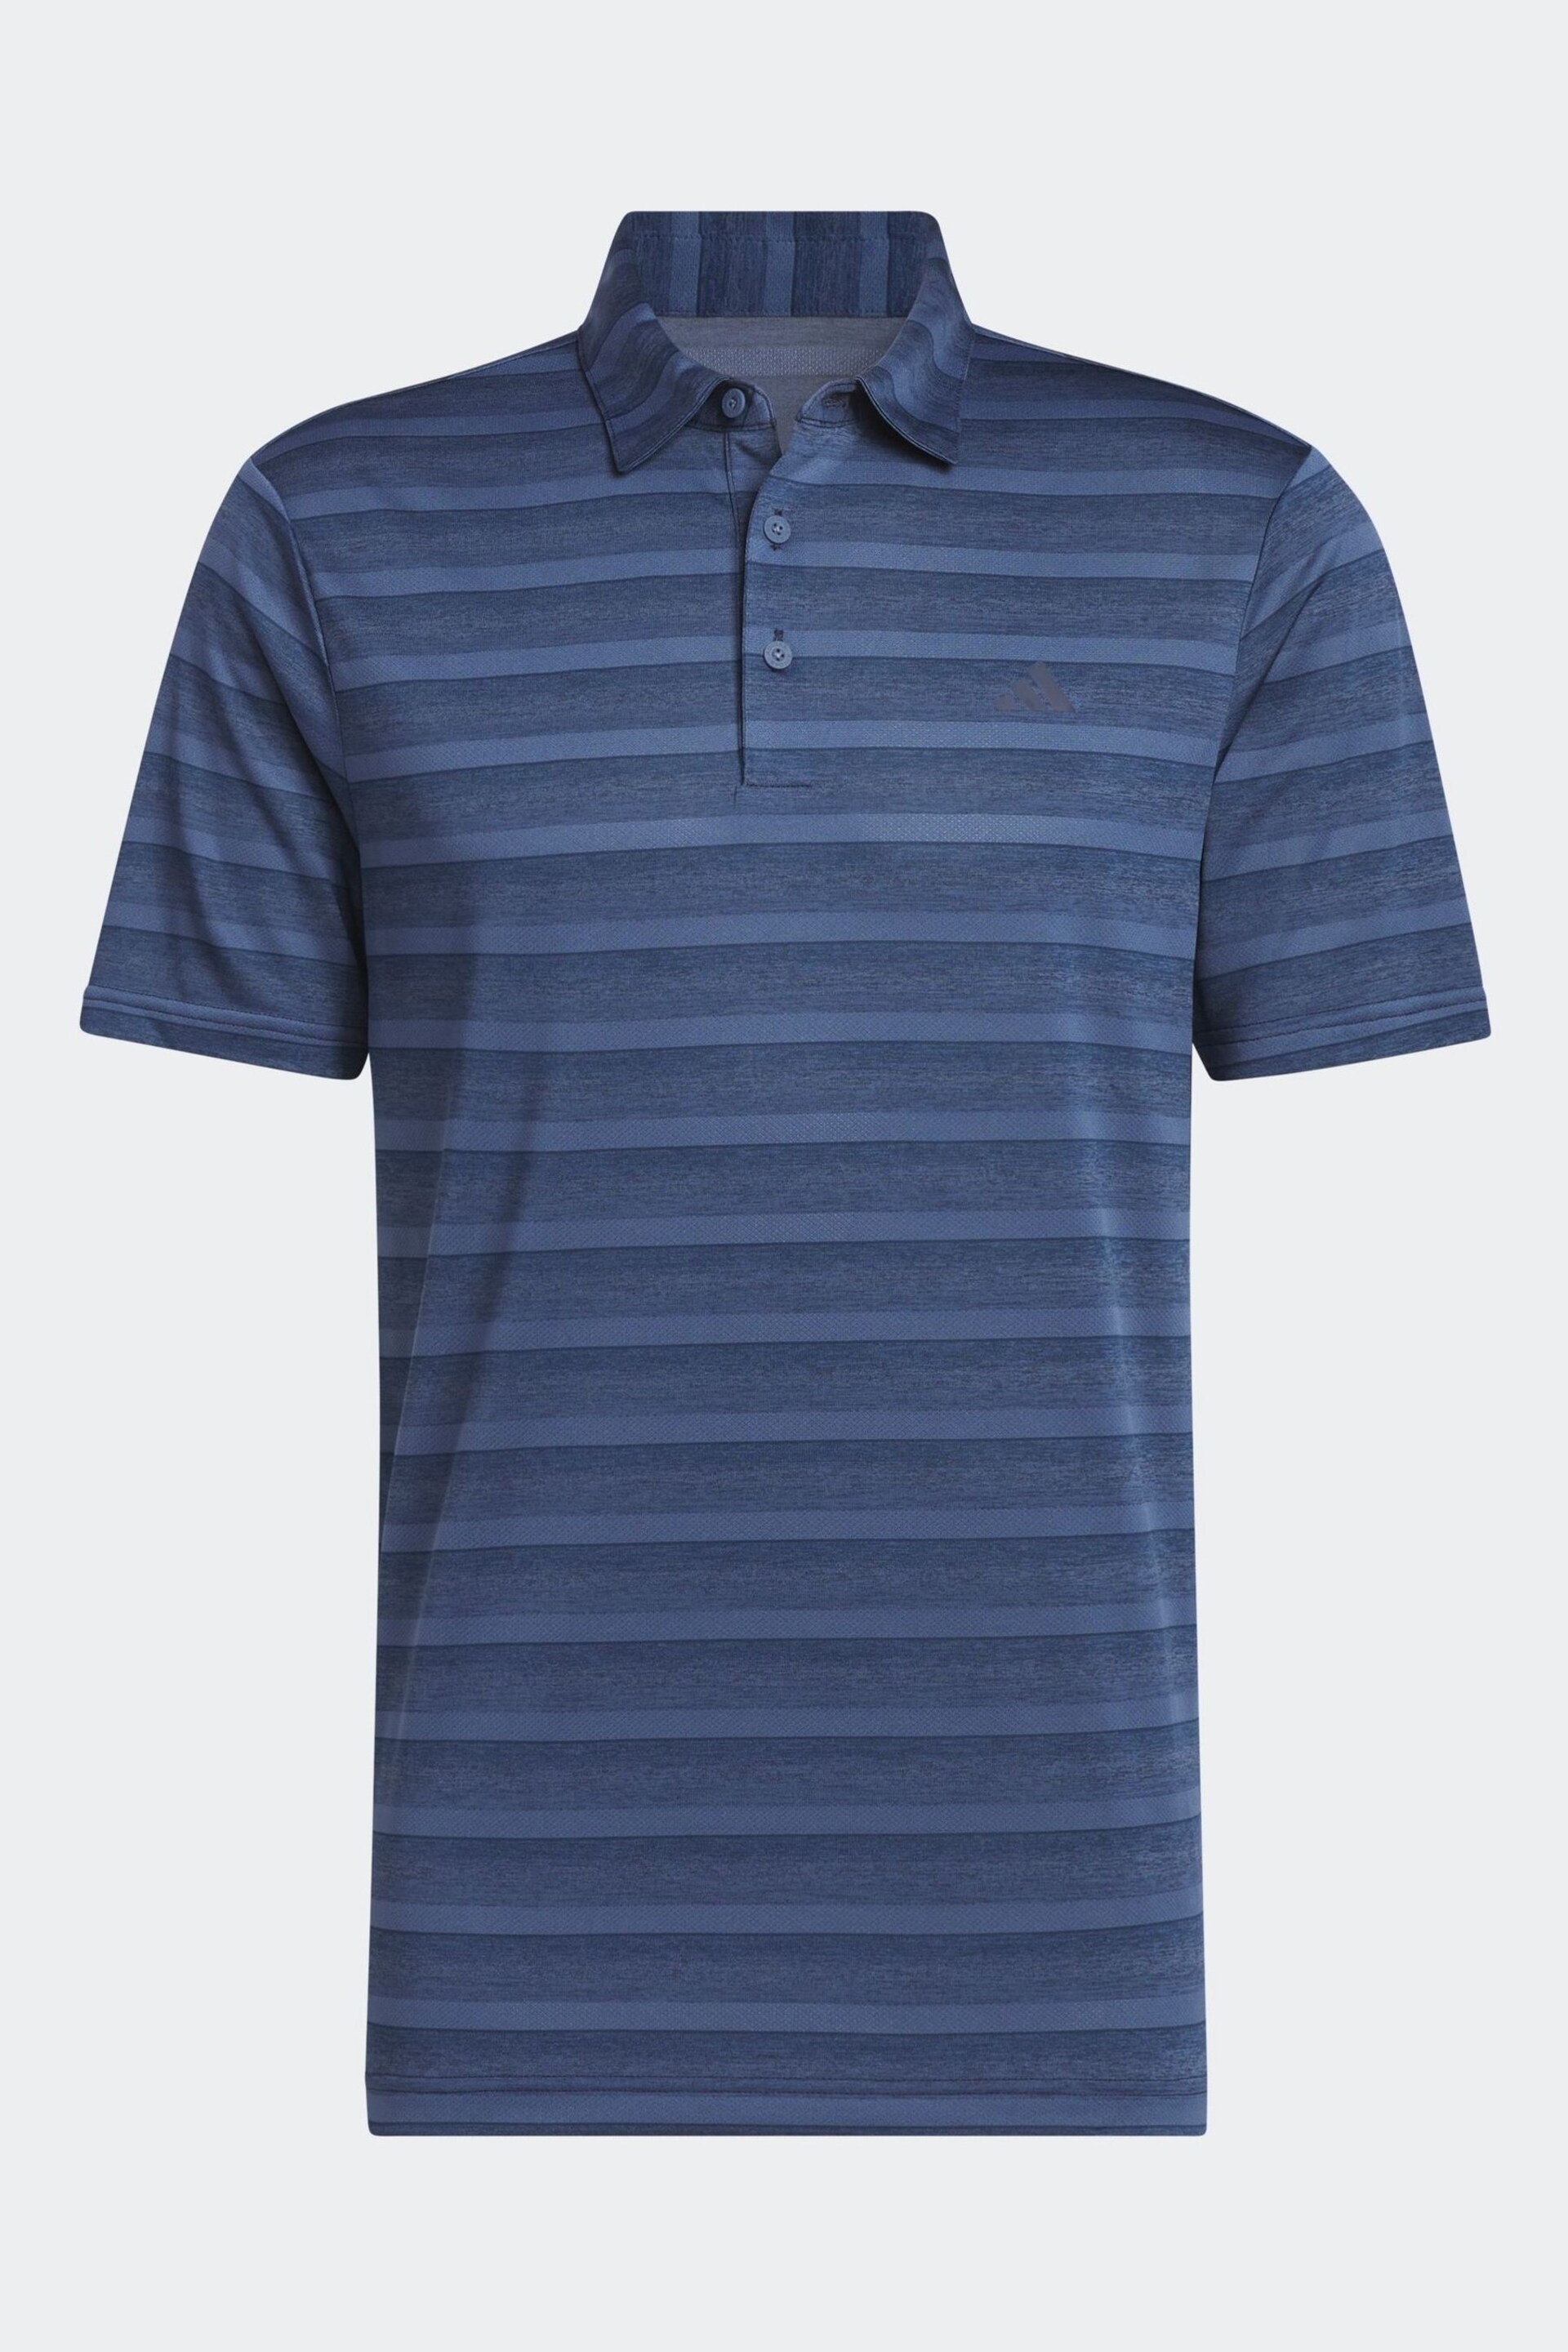 adidas Golf Two Colour Striped Polo Shirt - Image 7 of 7